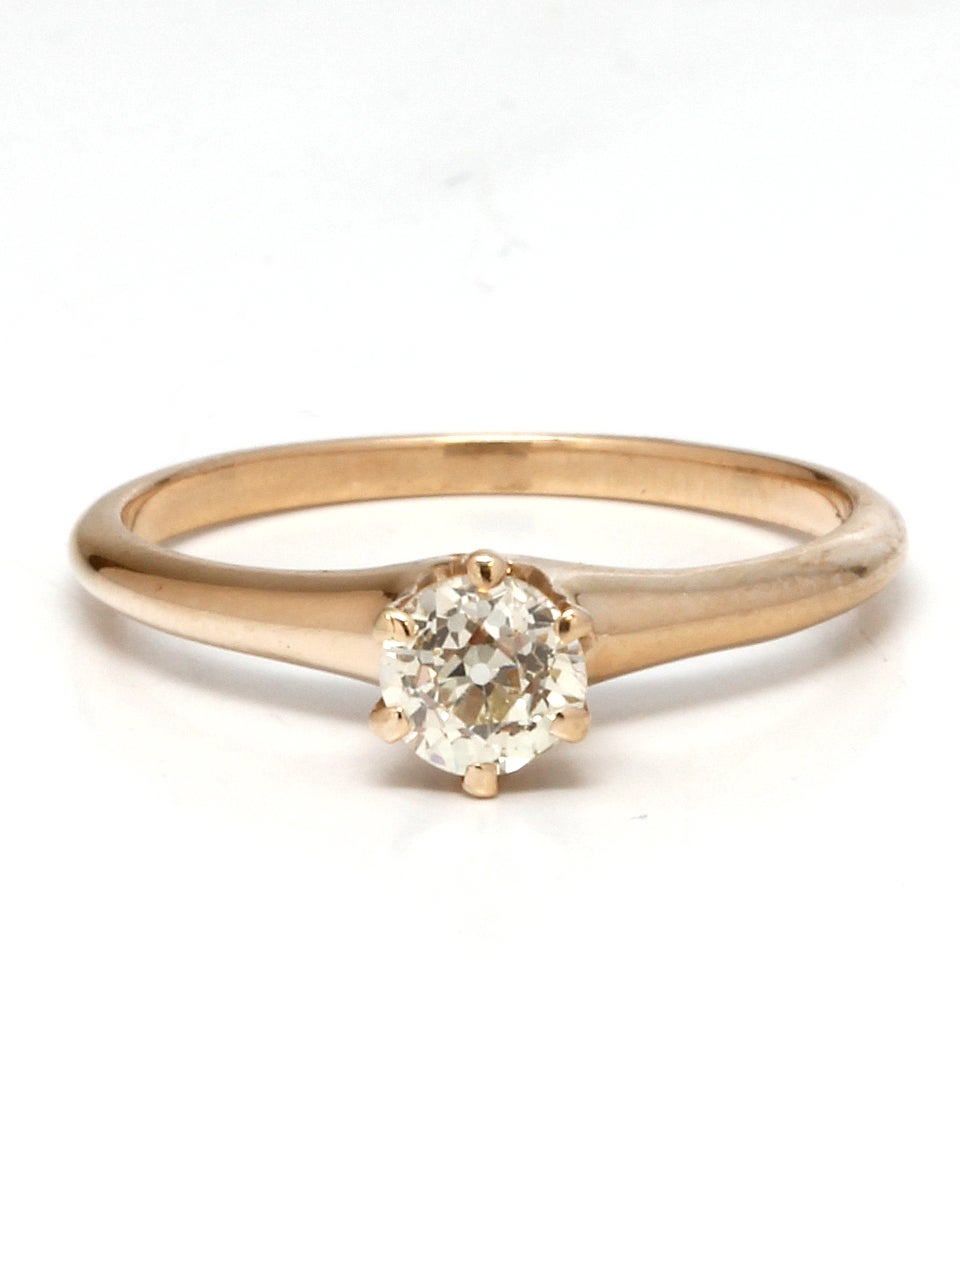 14K yellow gold solitaire with 0.59ct Old Mine Cut diamond, light fancy yellow color and VS2 clarity. Classic solitaire with 6 prong setting and fiery diamond. Perfect to stack with bands. Size 7.75 circa 1900's

As a special offering for our